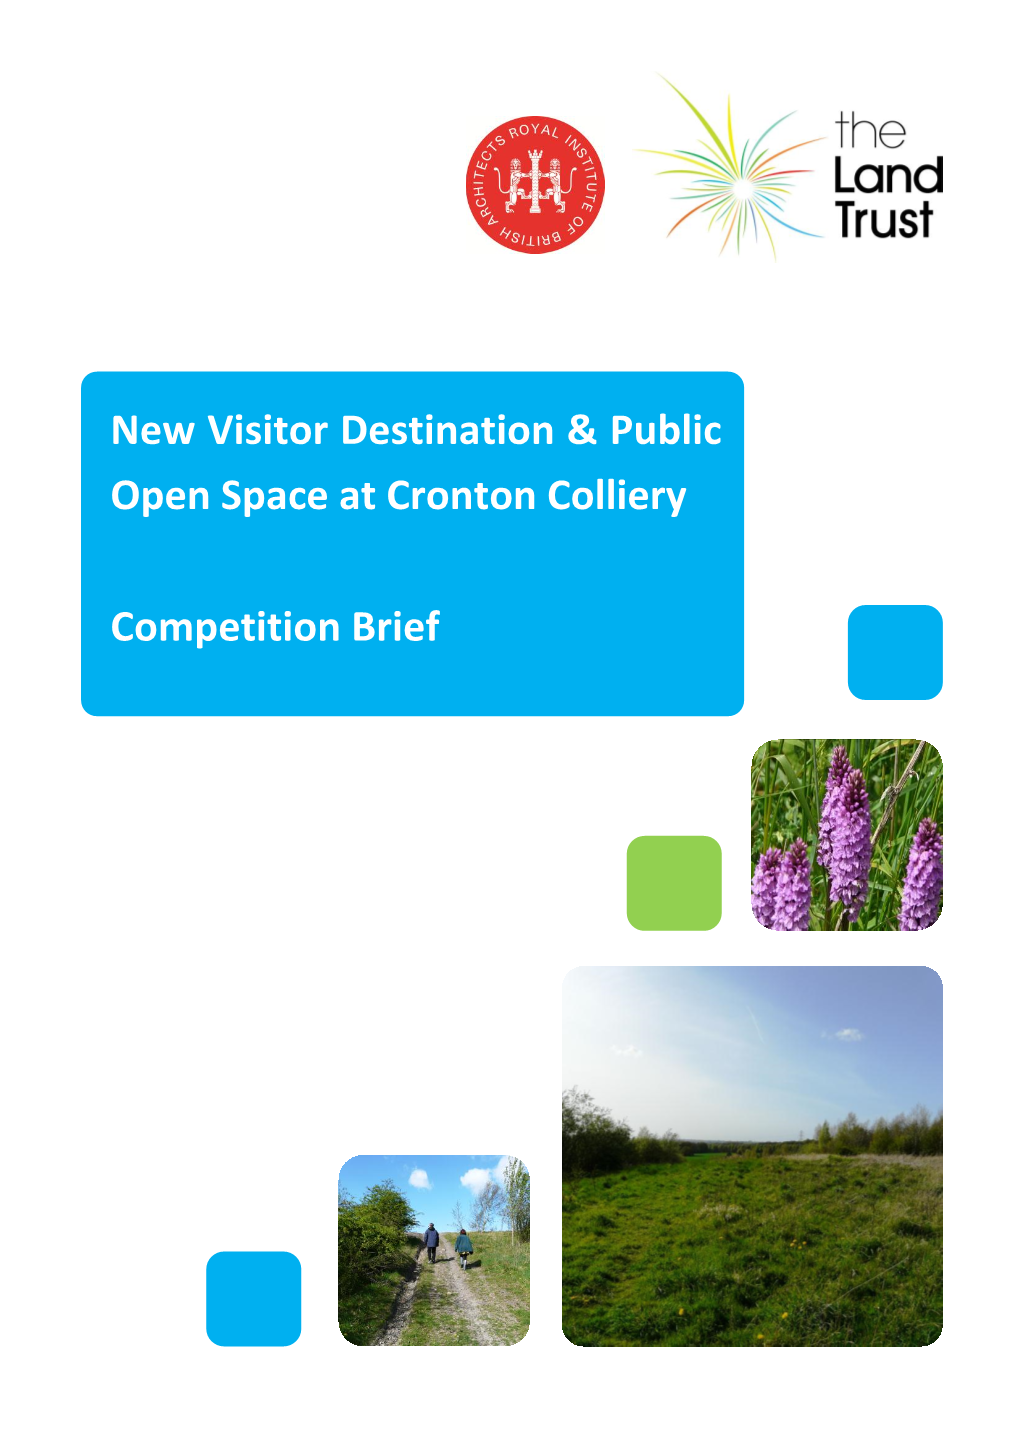 New Visitor Destination & Public Open Space at Cronton Colliery